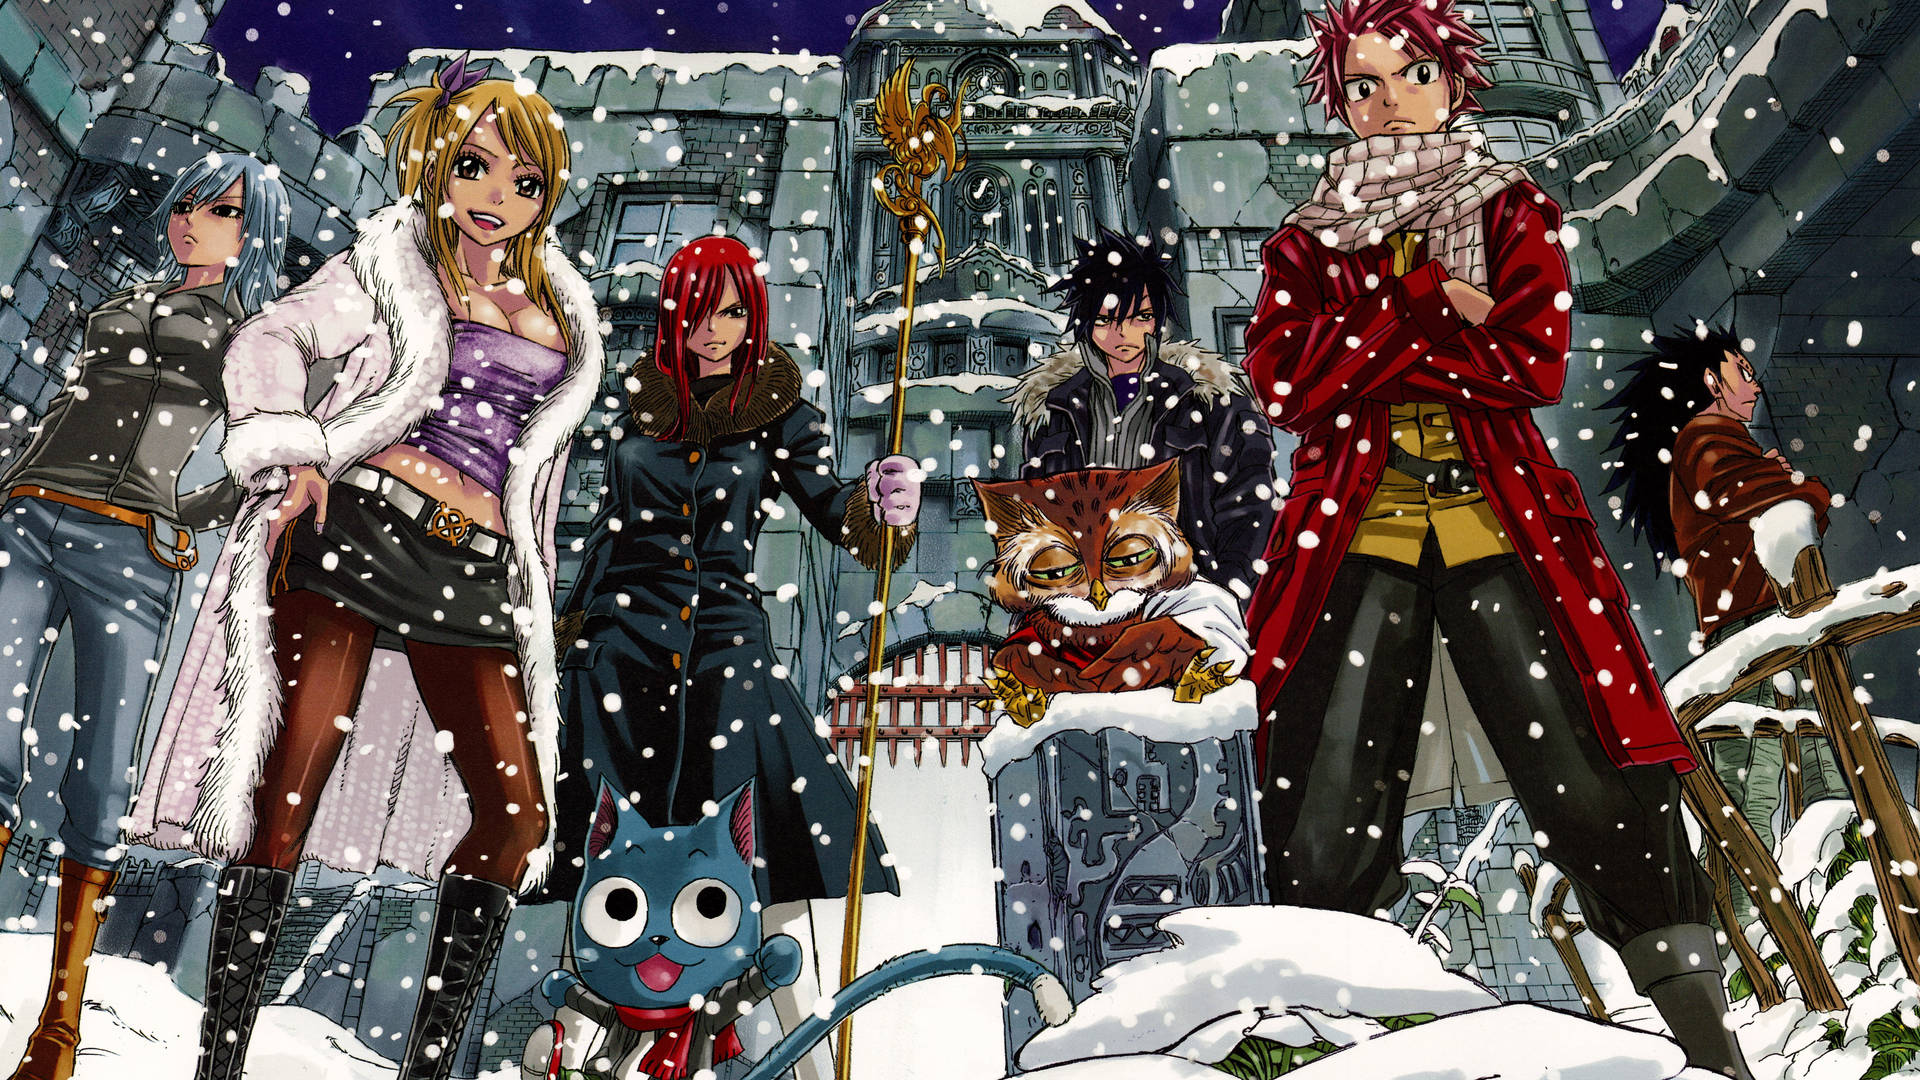 Free Fairy Tail Characters Wallpaper Downloads, [100+] Fairy Tail Characters  Wallpapers for FREE 